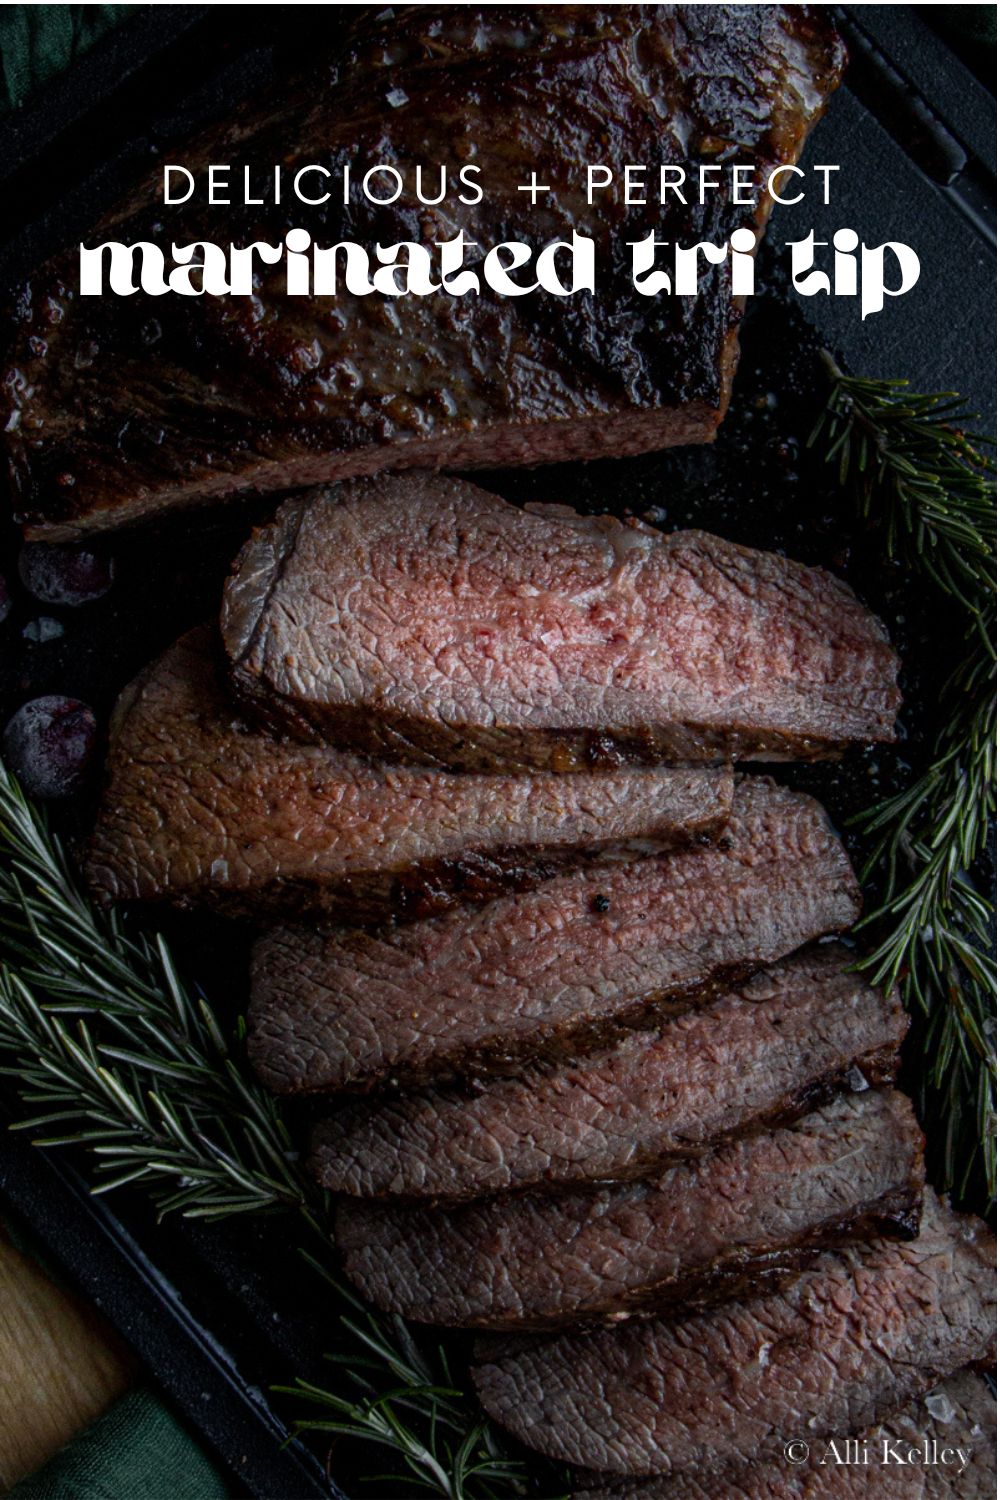 My tri tip recipe is a guaranteed crowd-pleaser! This succulent cut of beef is seasoned with my special tri tip marinade to ensure you get a juicy, flavorful bite every time. With the outside perfectly browned and the inside wonderfully tender, your tri tip roast will be the star of any dinner table!